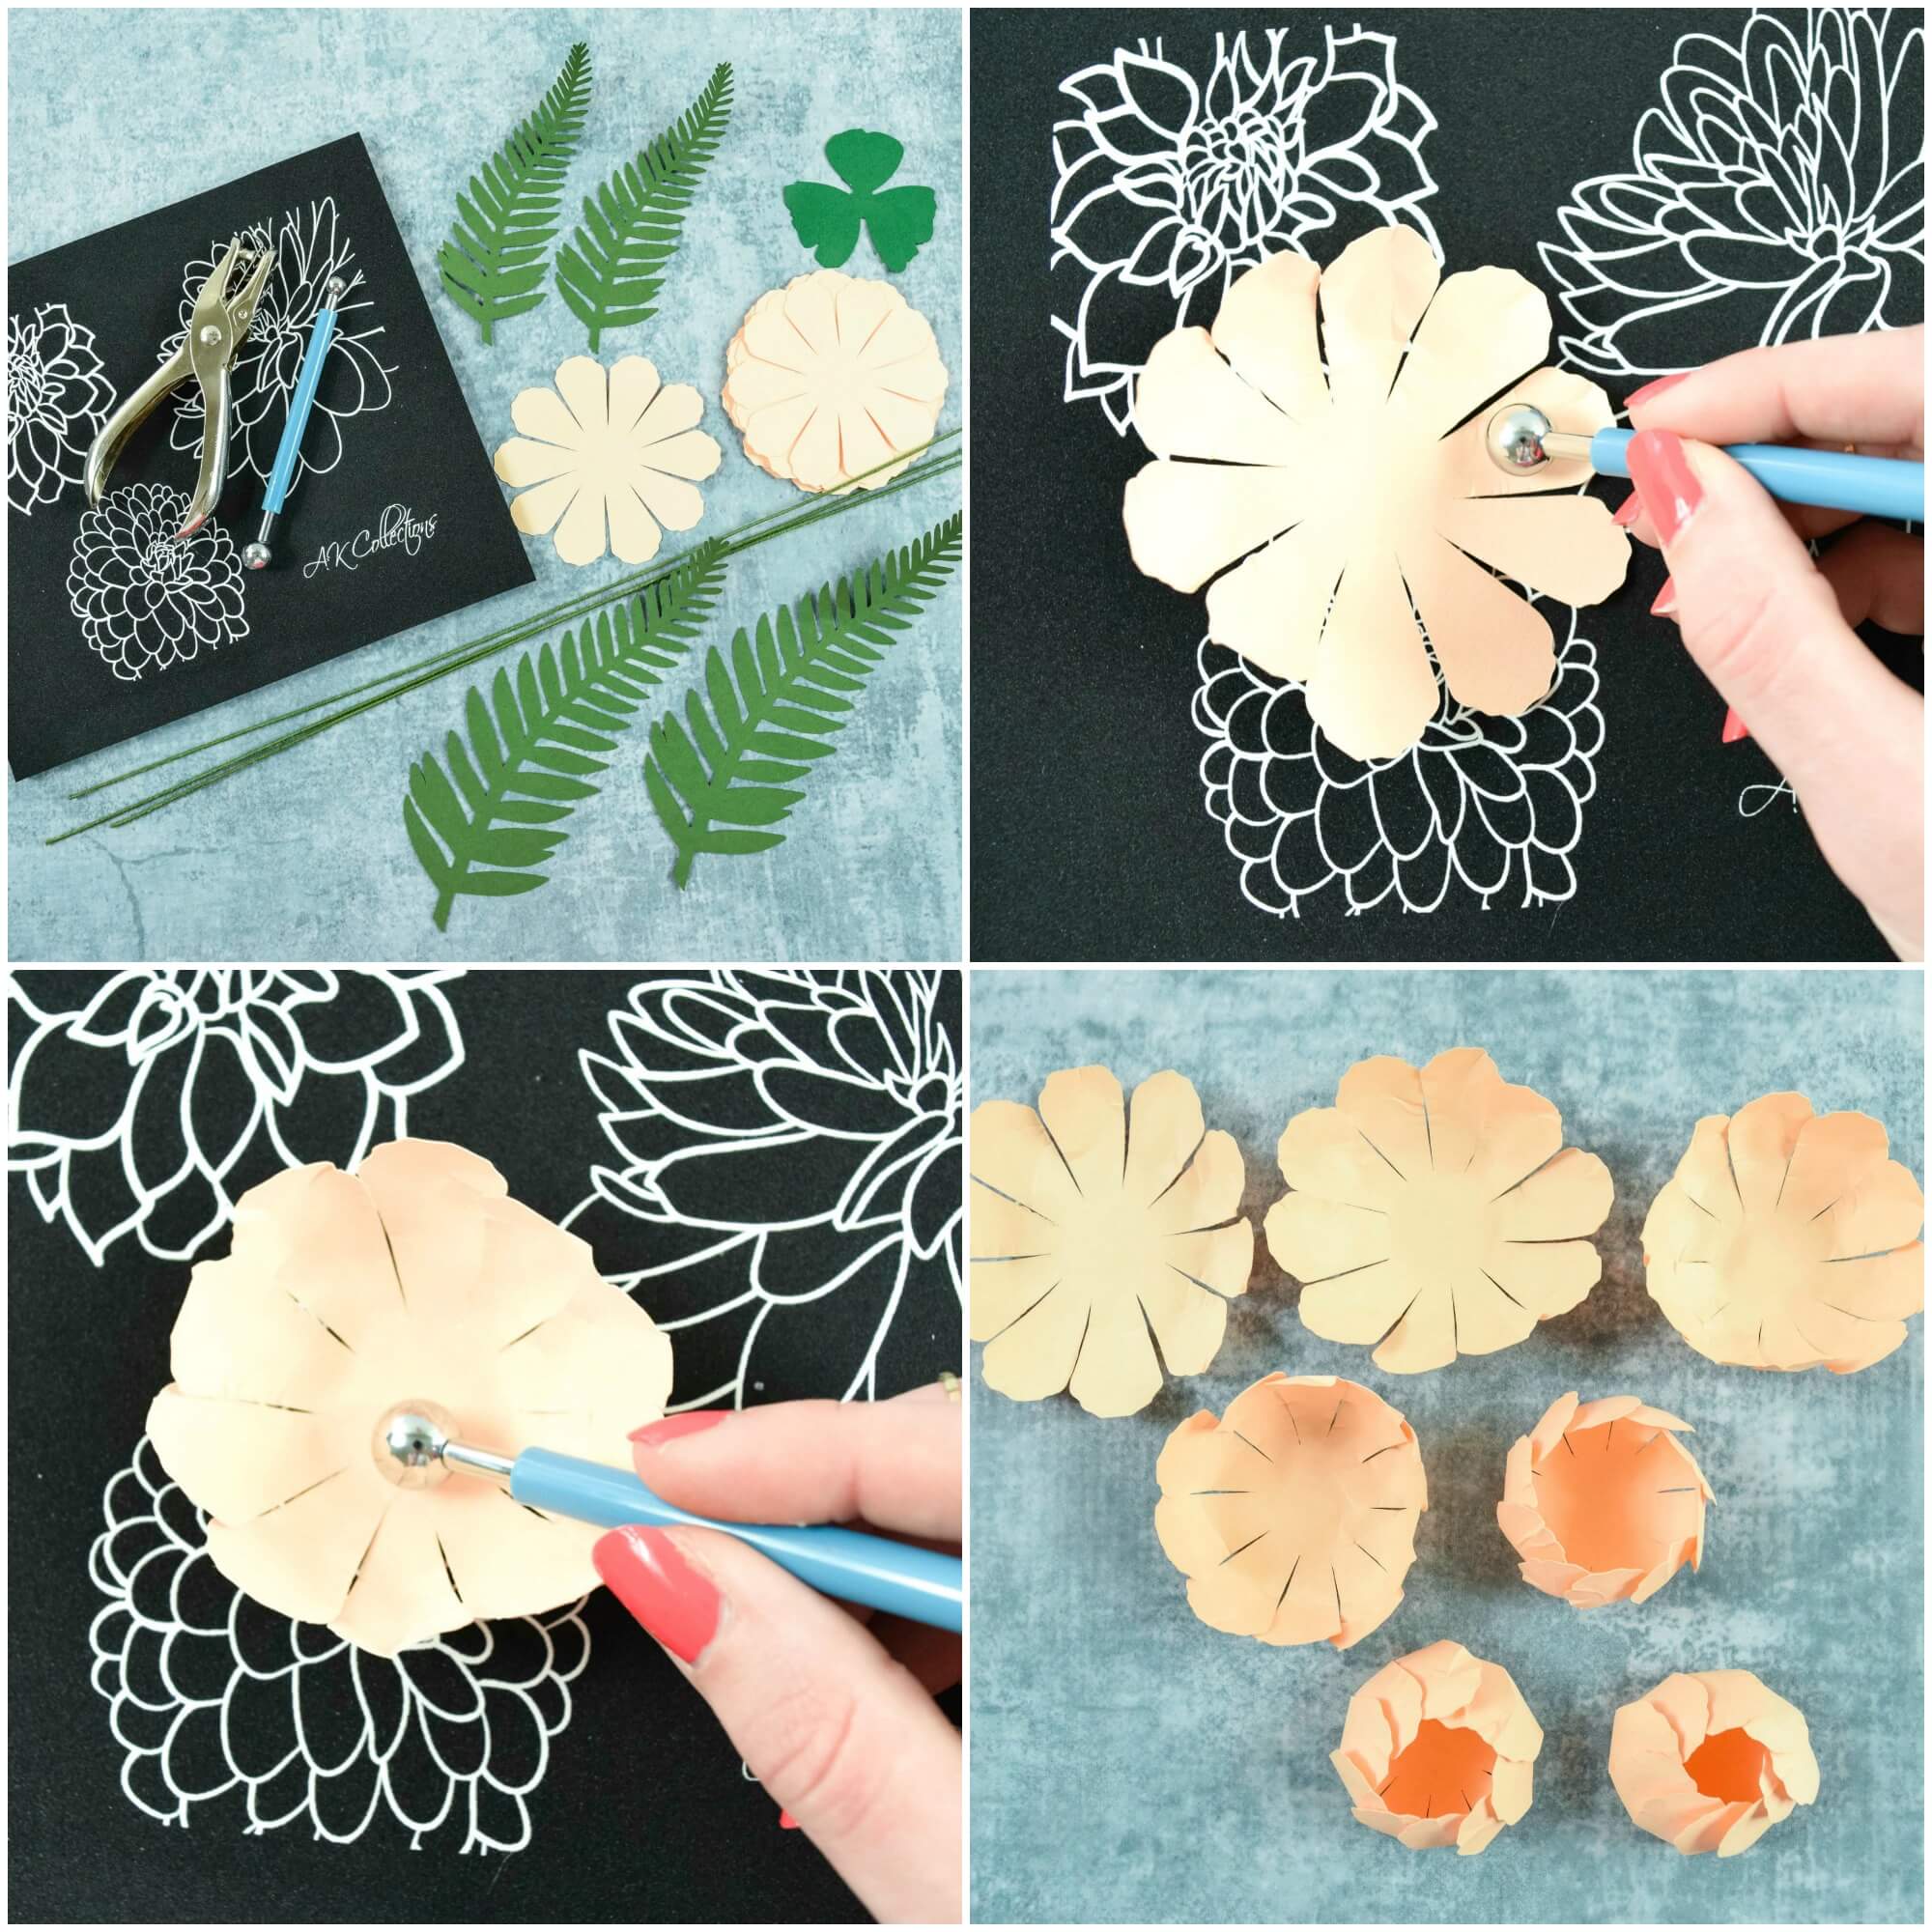 How to Make Paper Flower Balls